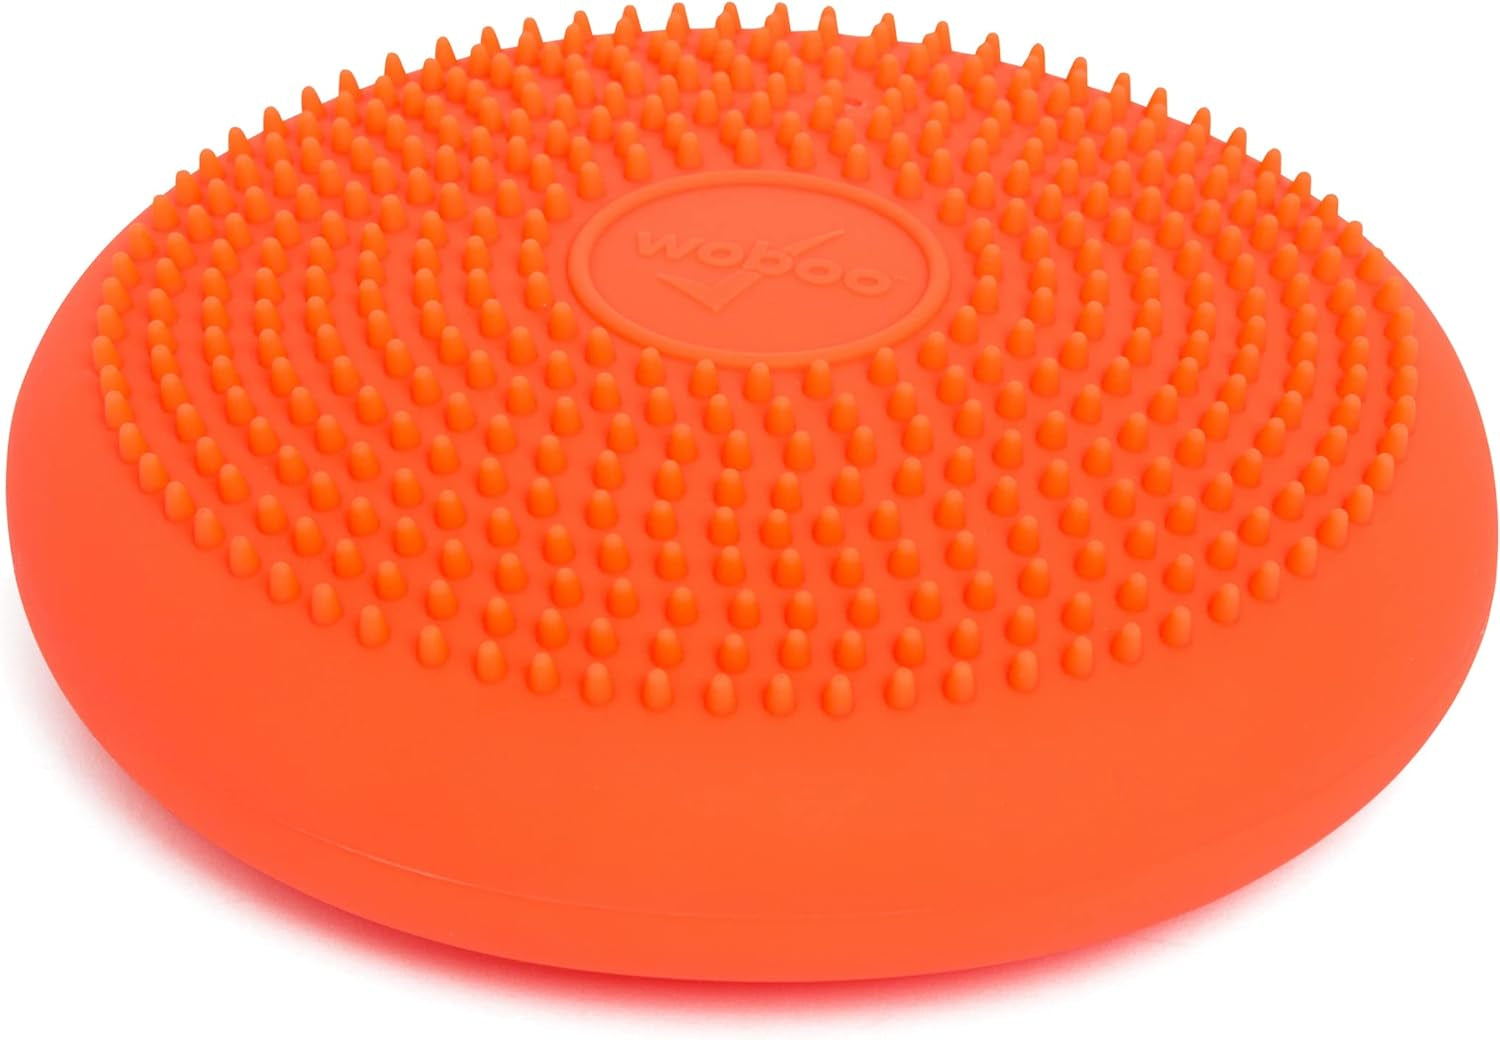 Bouncyband Wiggle Seat, Orange, 1-Pack – Small 10.75” D X 2.5” H Wobble Cushion for Kids Aged 3-7 – Sensory Tool Promotes Active Learning & Improves Productivity – Includes Pump for Easy-Inflation